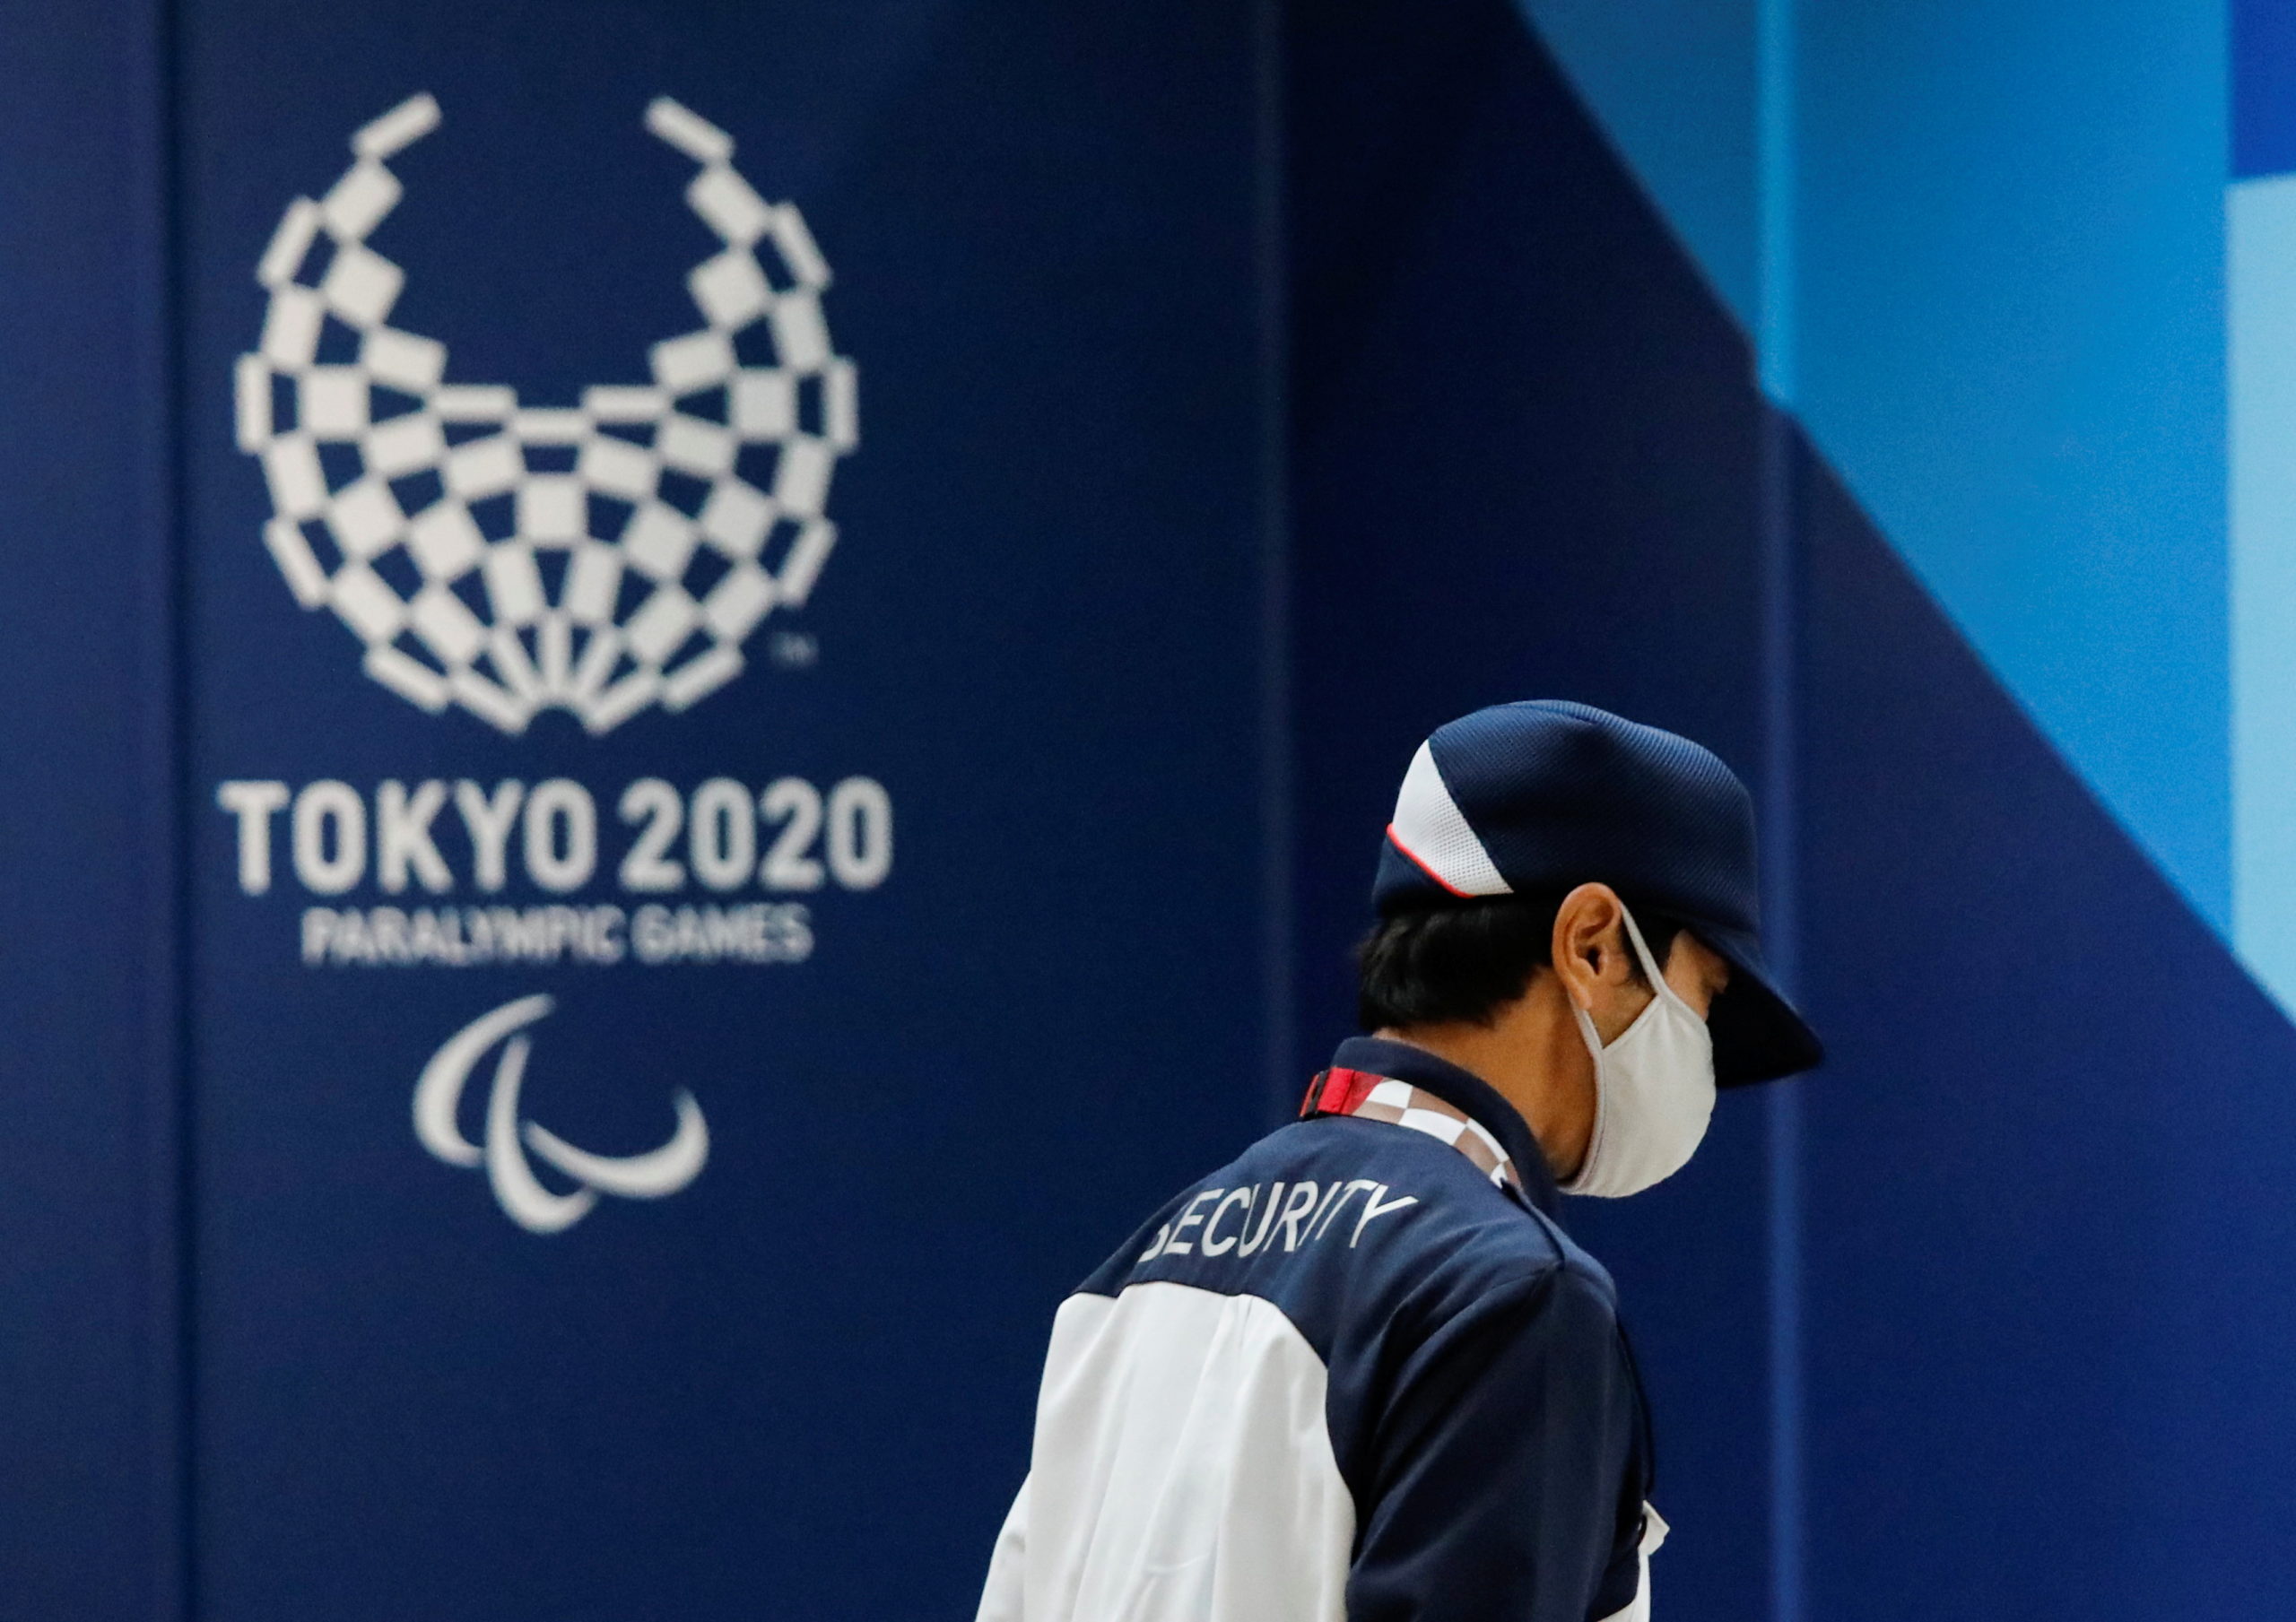 A security officer wearing a protective face mask walks past the logo of Tokyo 2020 Paralympic Games, amid the coronavirus disease (COVID-19) pandemic, in Tokyo, Japan, August 16, 2021.